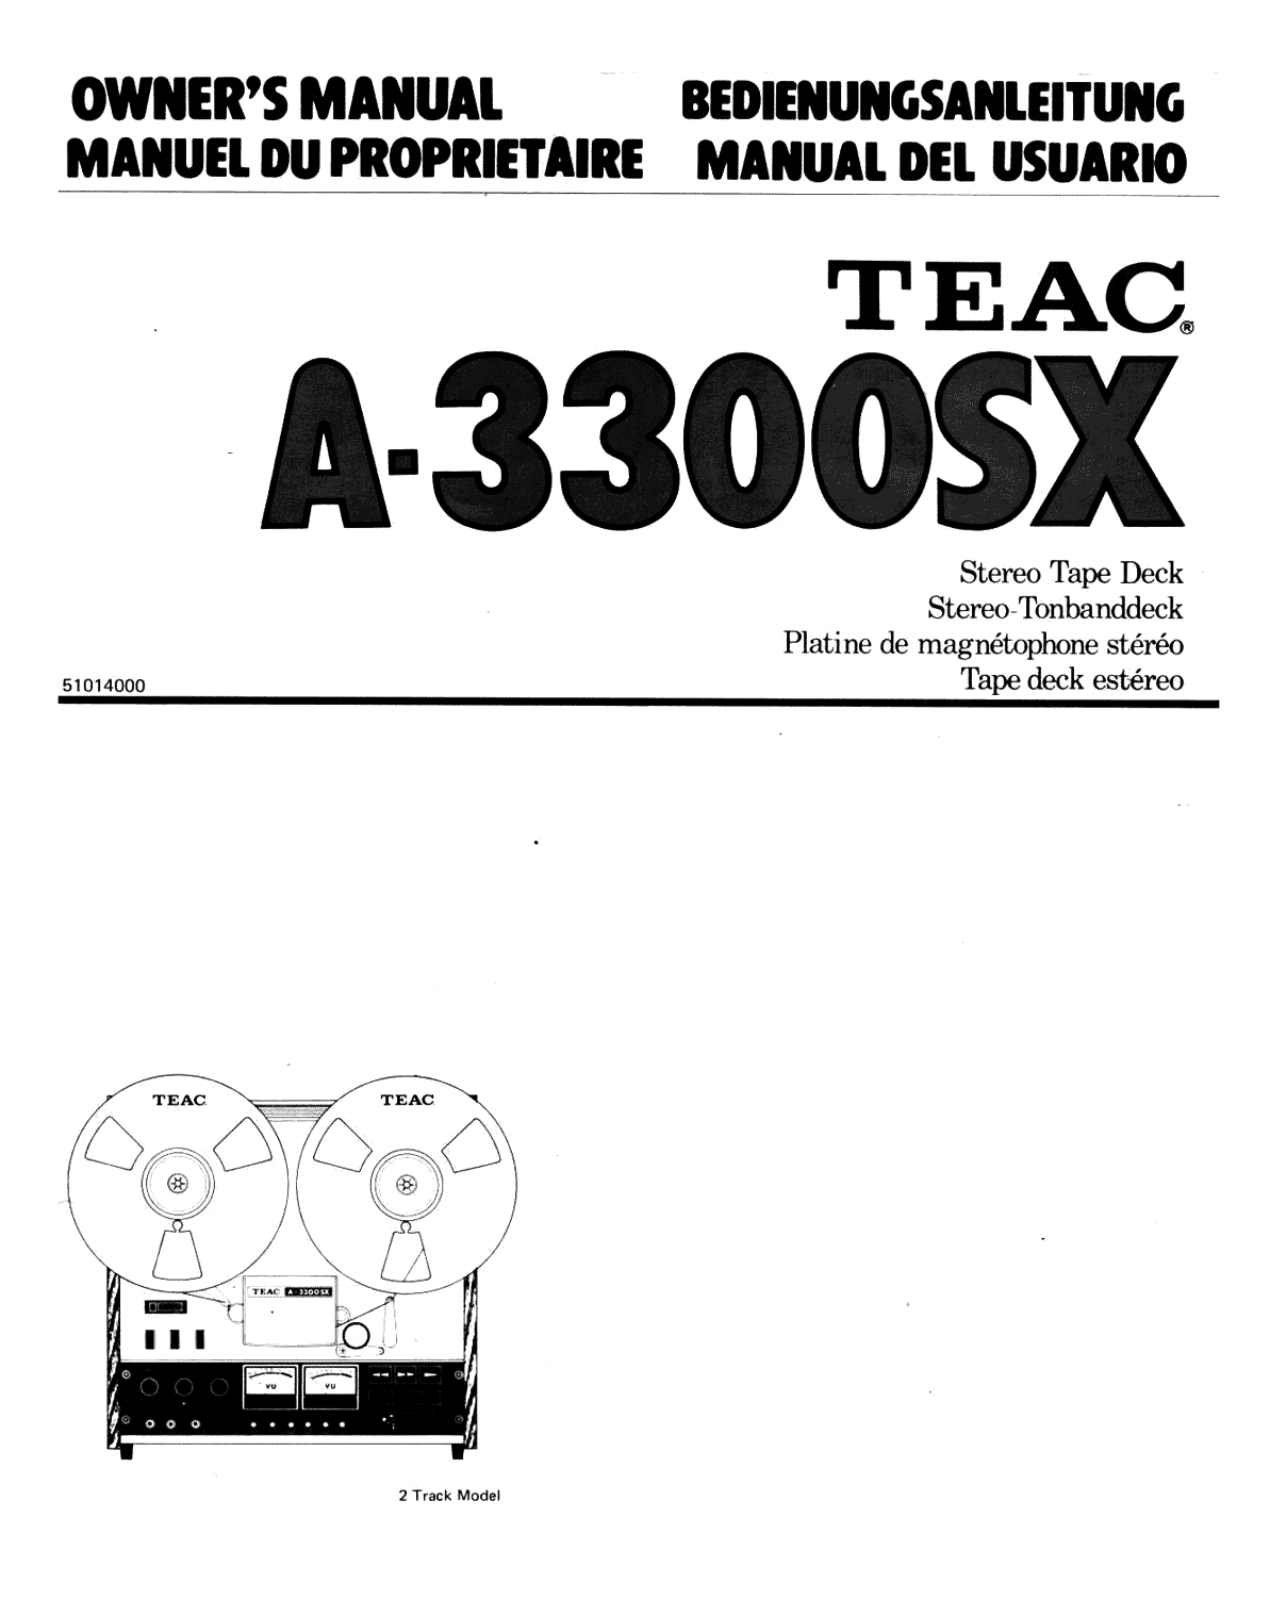 TEAC A-3300-SX Owners manual